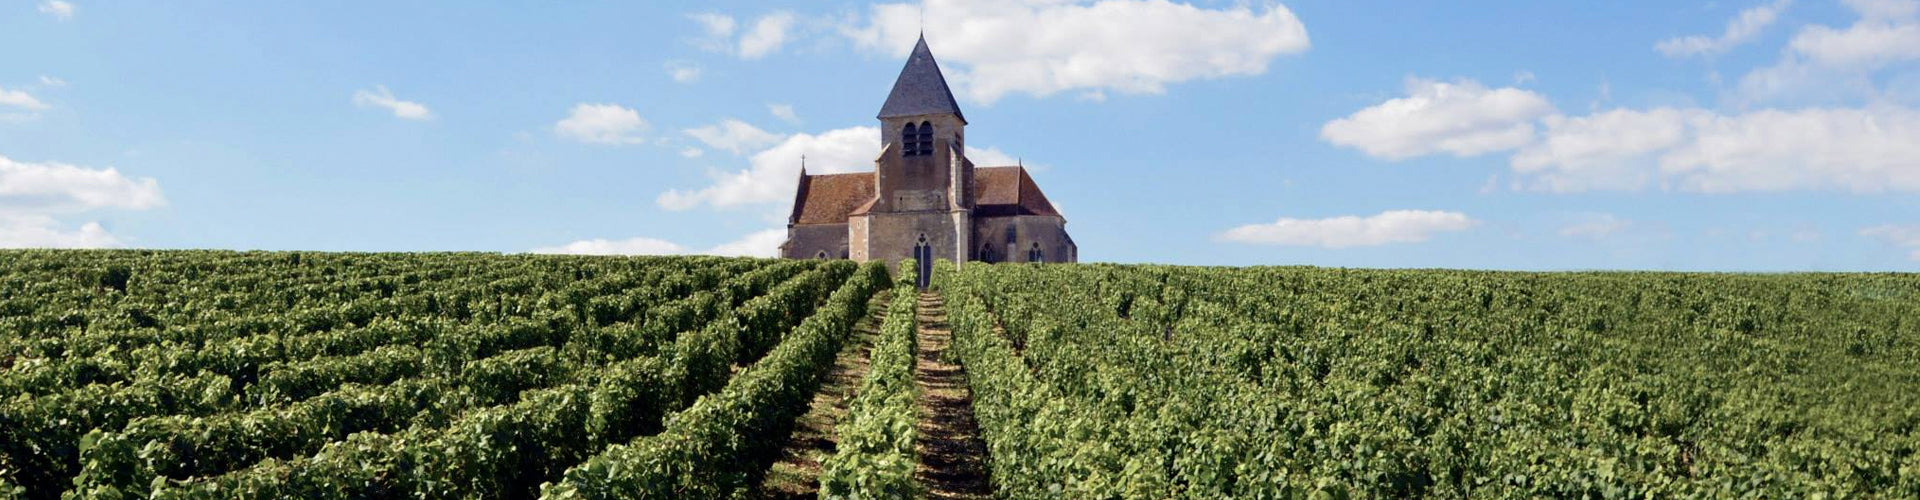 Jean-Marc Brocard Vineyards with Vézelay Abbey in Background